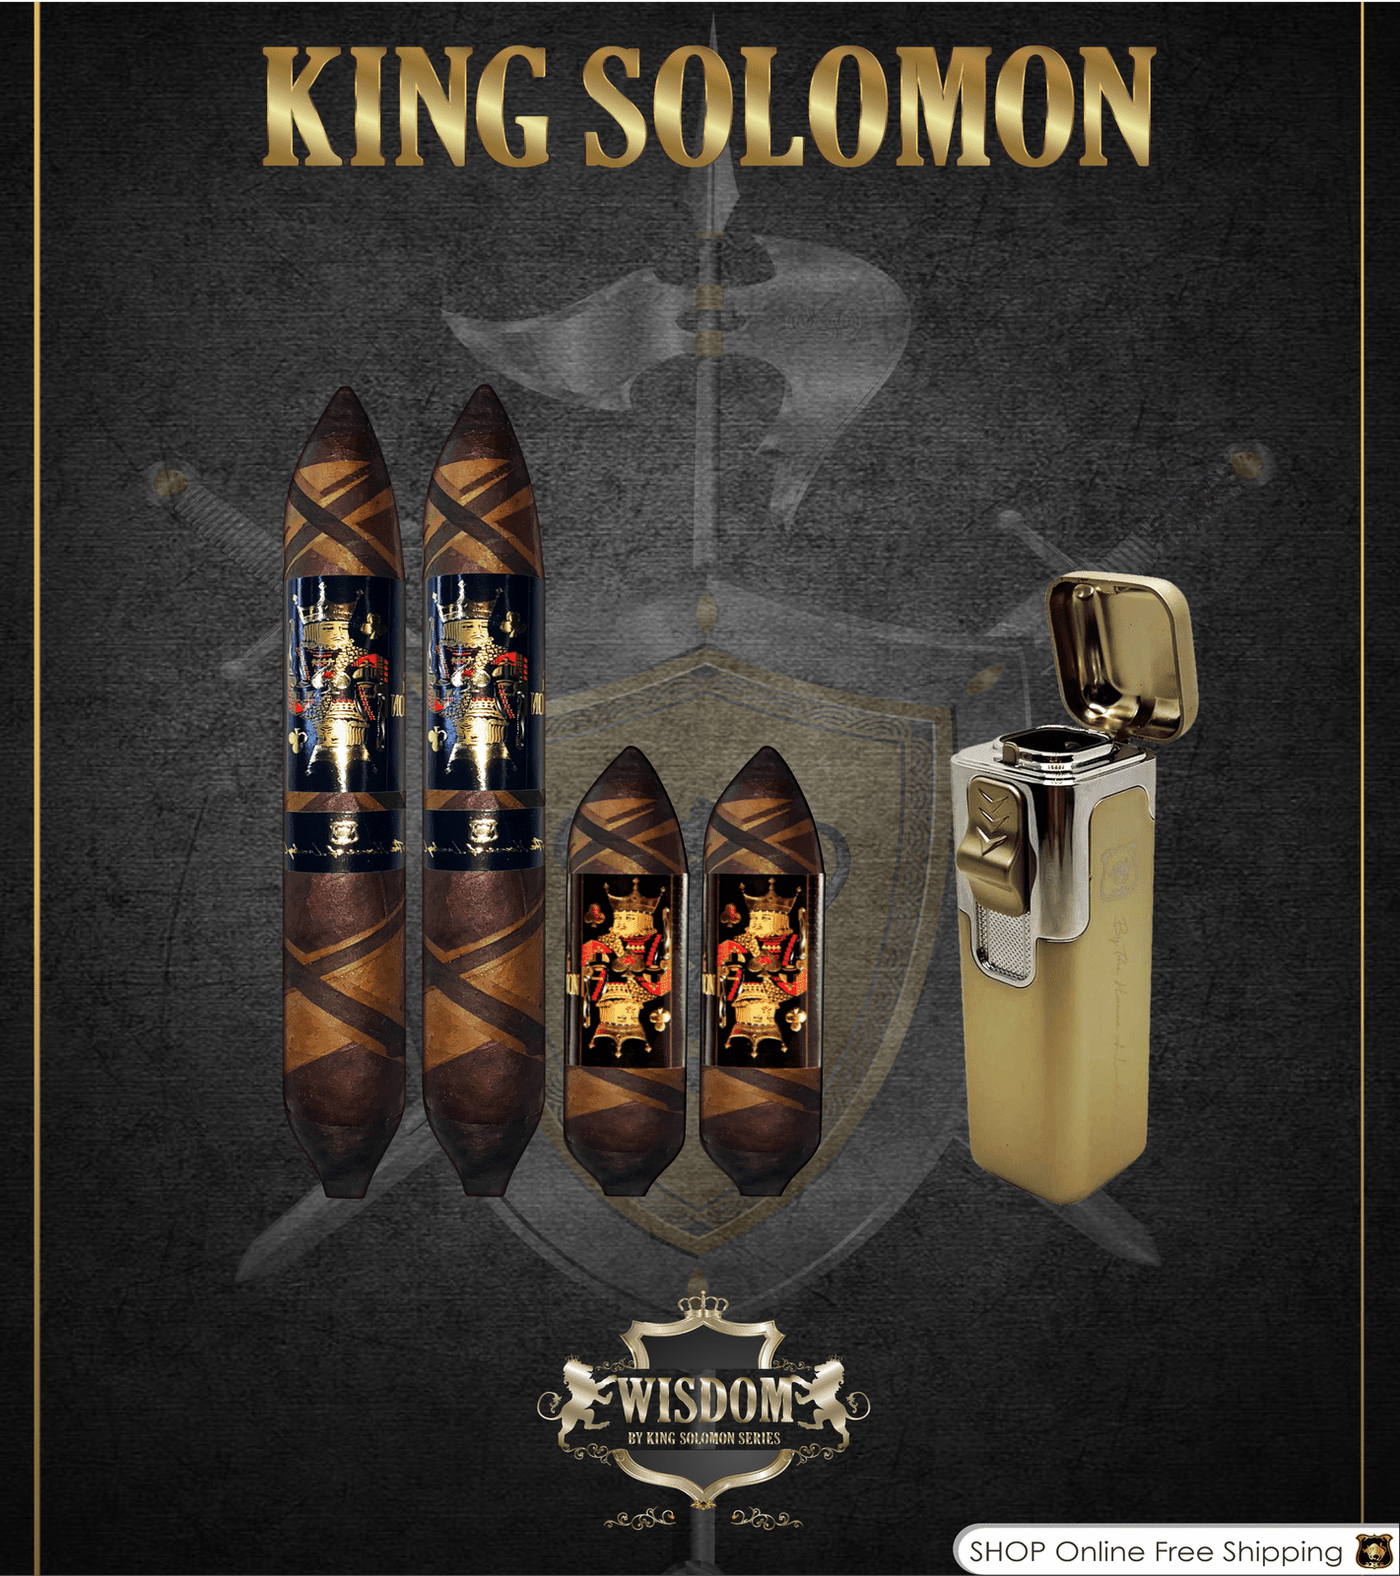 Wisdom 4x60 Cigar From The King Solomon Series: Set of 2 and 2 King Solomon 7x58 Cigar with Torch